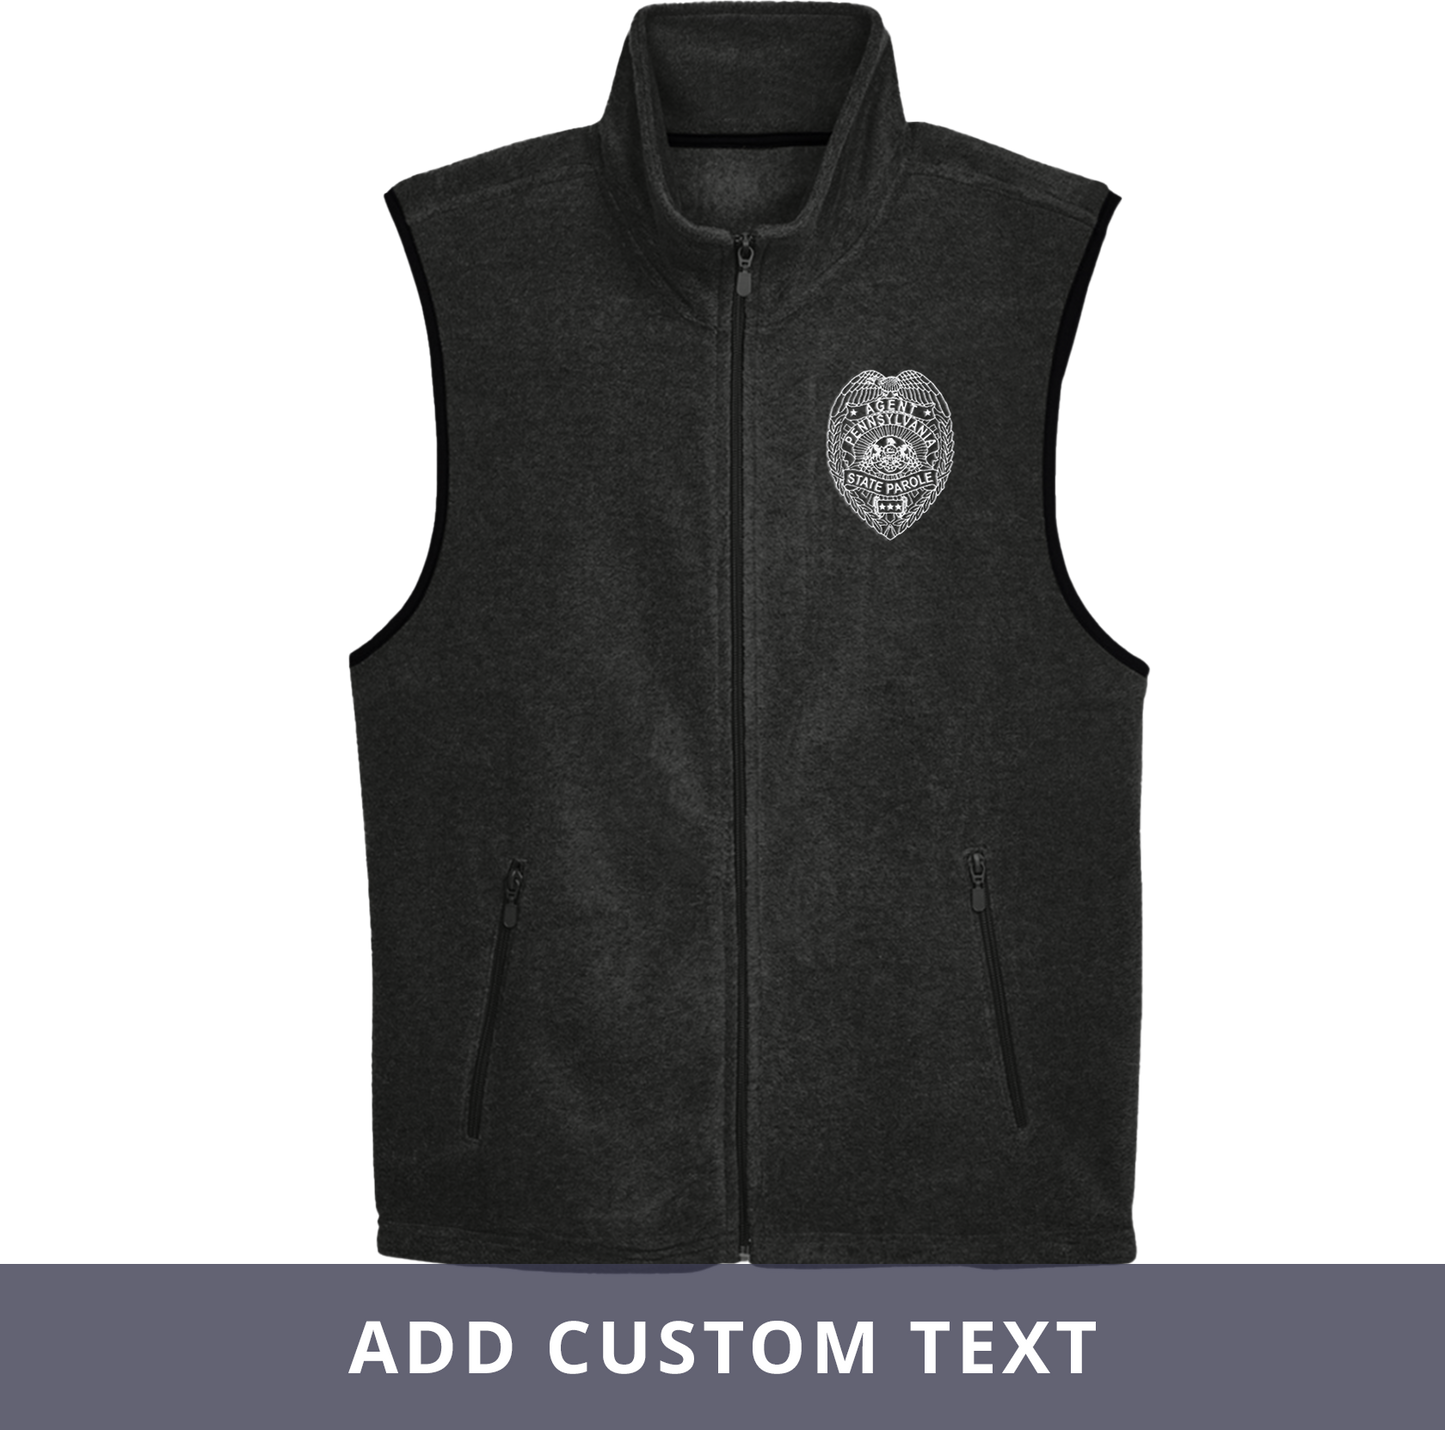 Adult Fleece Vest with Embroidered State Parole Agent Badge (Various Colors)